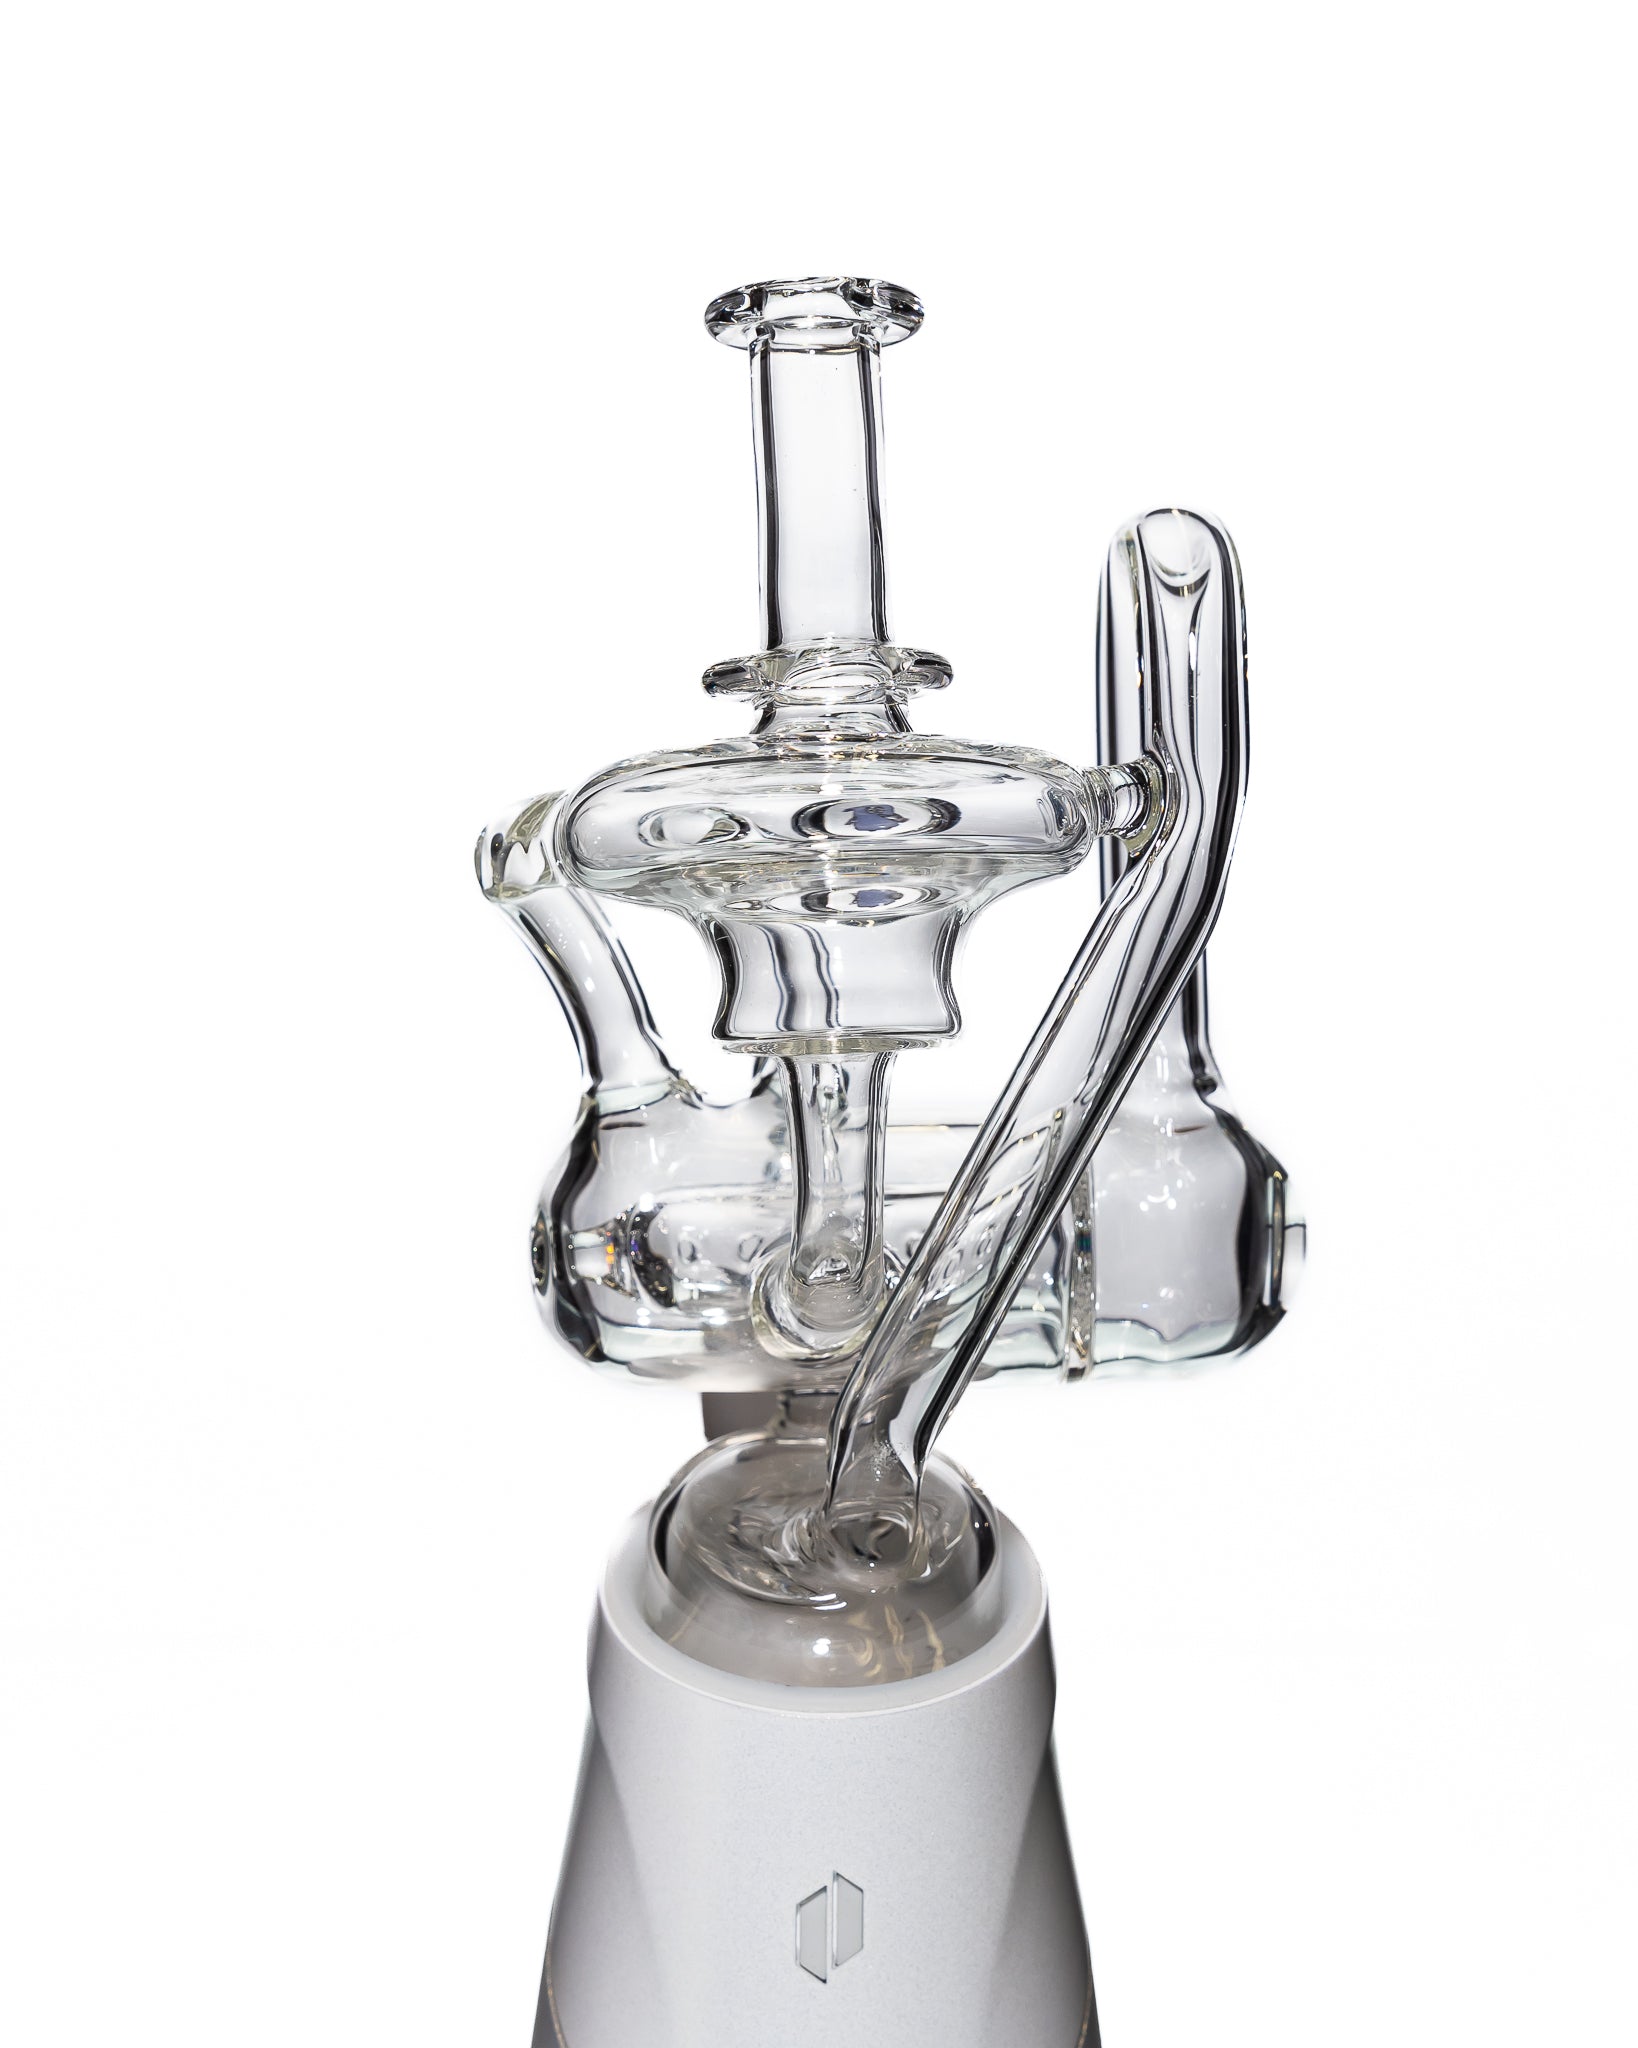 CYF - "Towelie" South Park Puffco Recycler